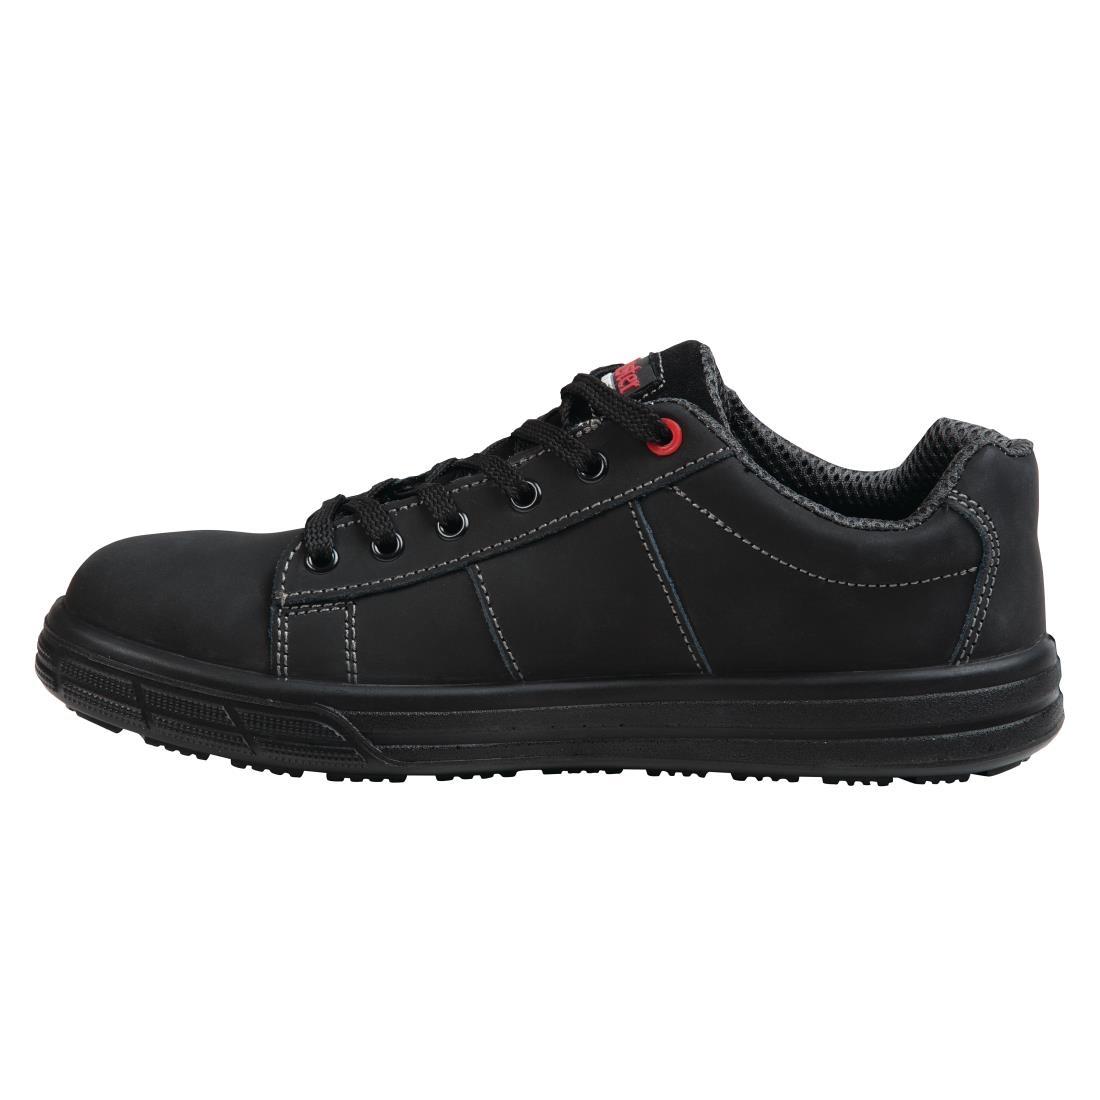 Slipbuster Safety Trainers Black 39 - BB420-39  - 6